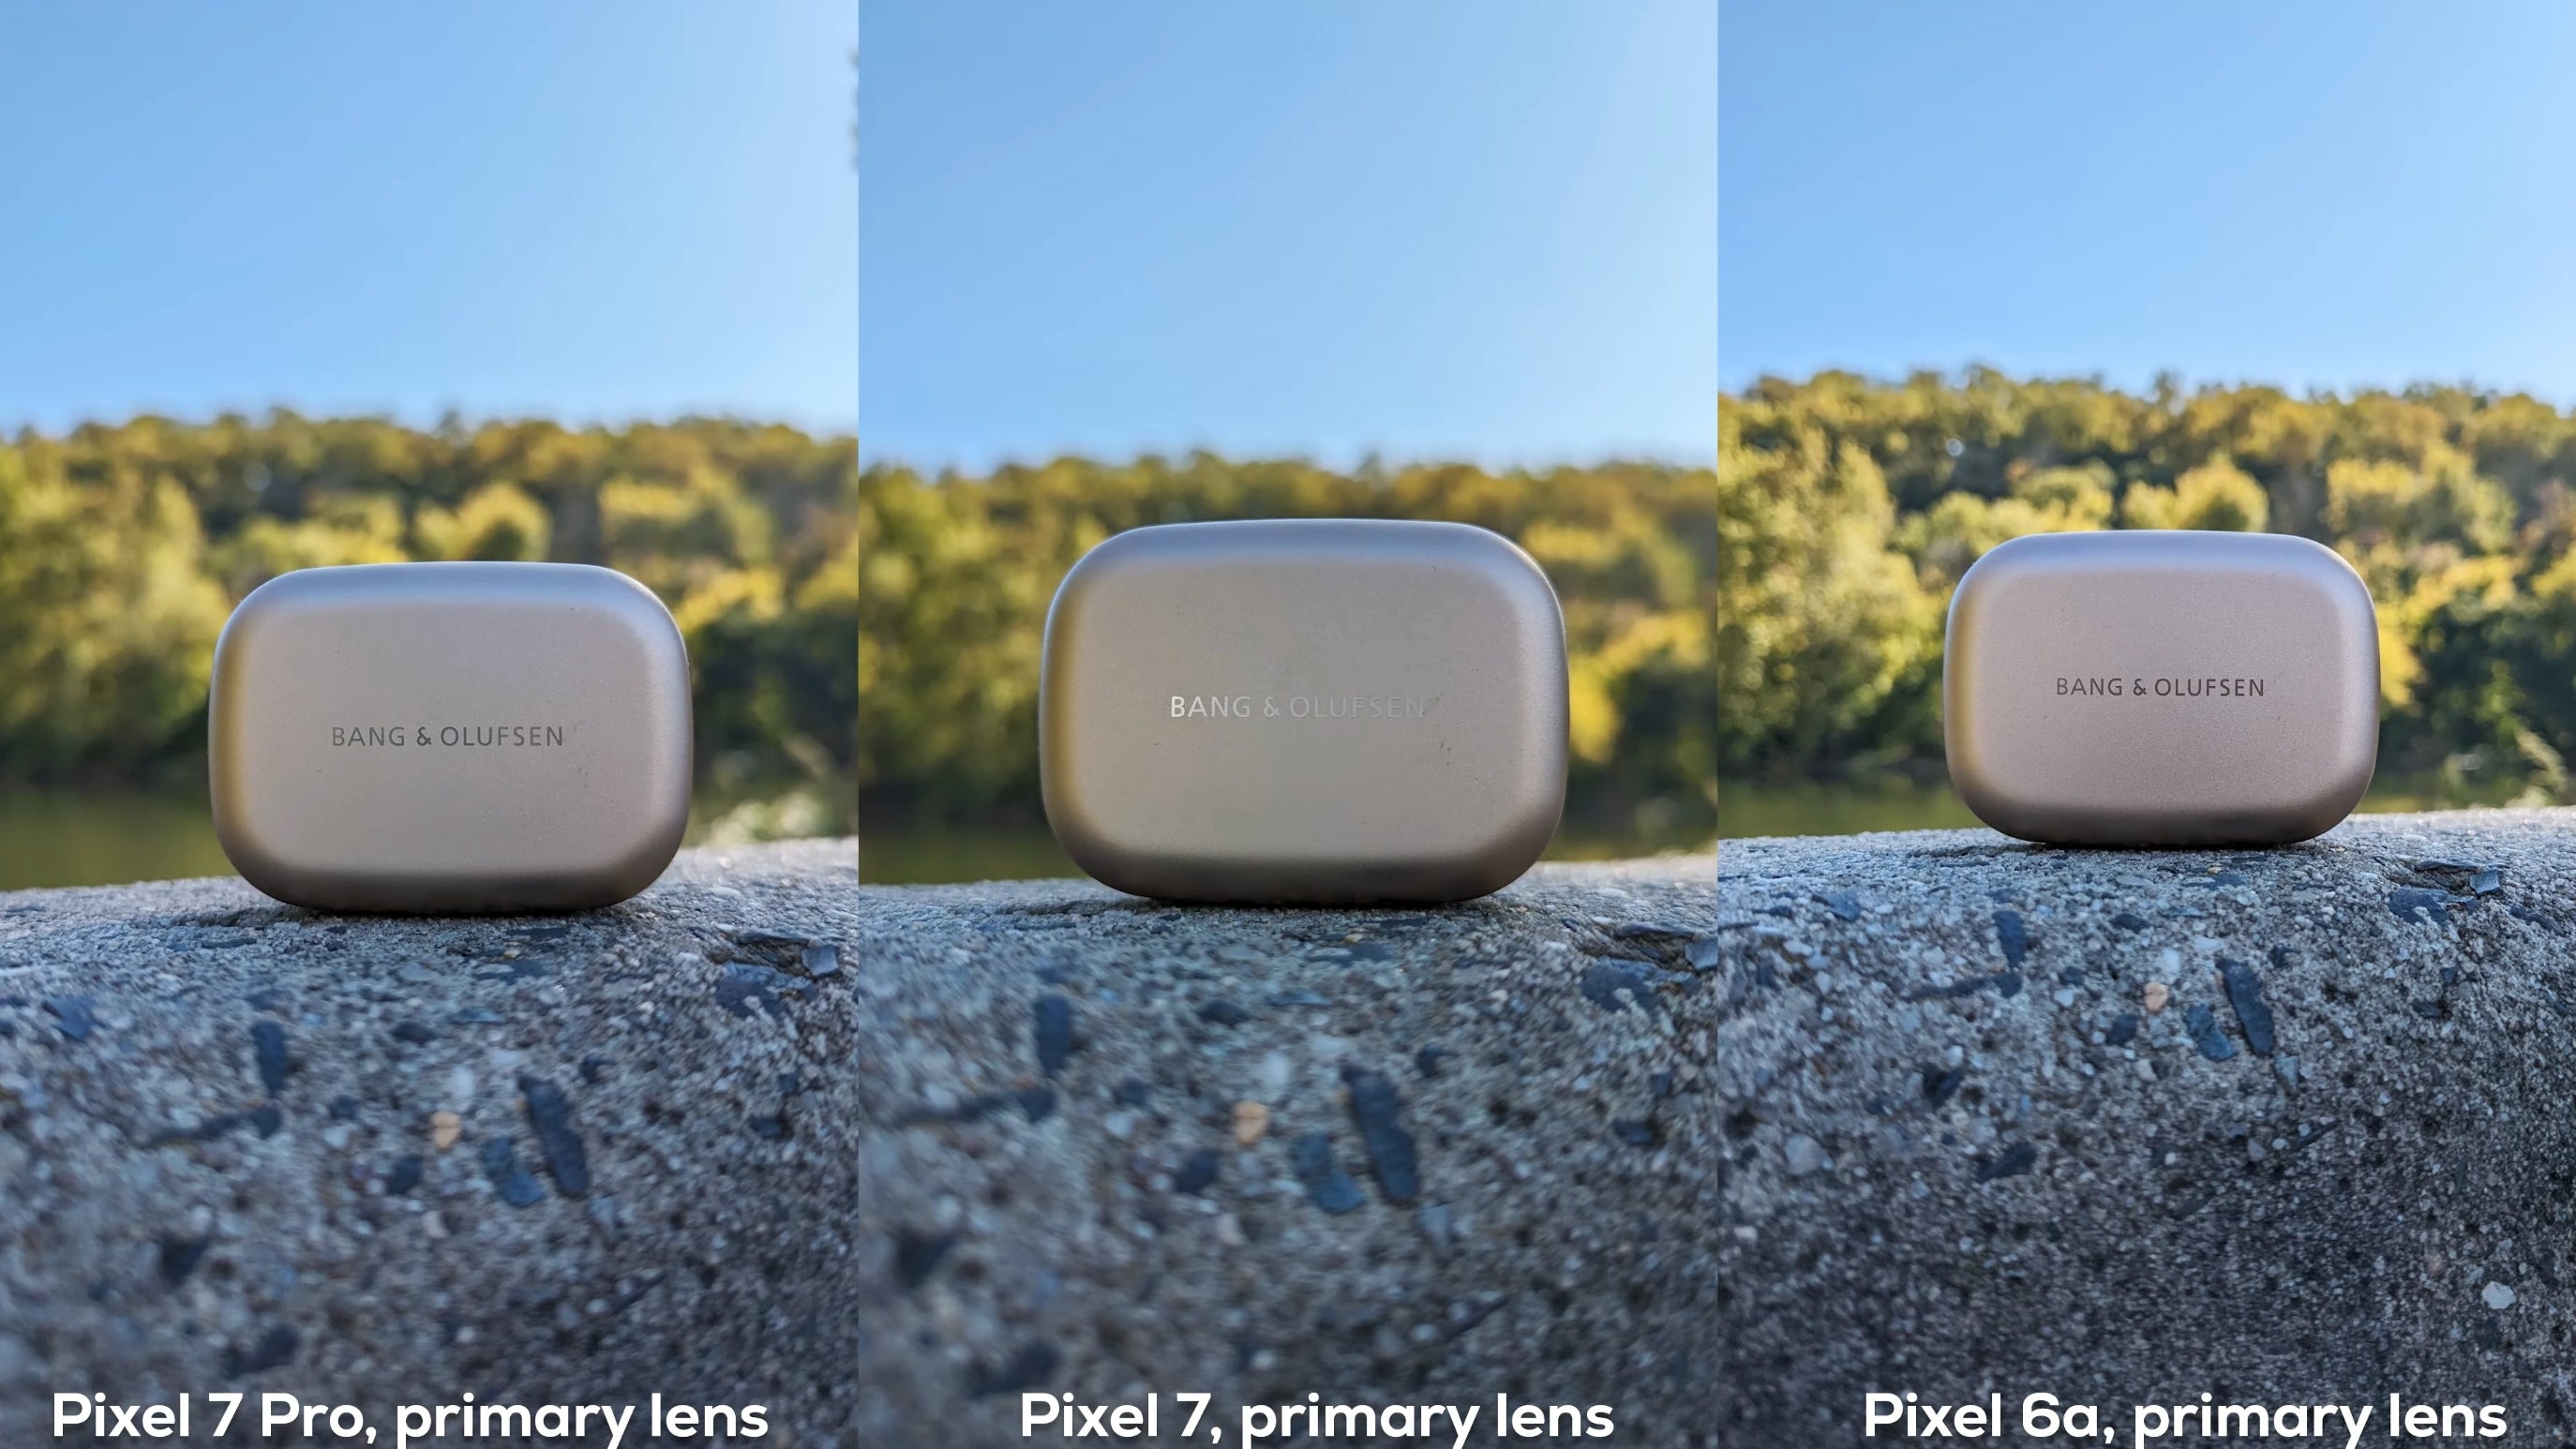 Background blur of the Pixel 7’s 1/1.3 sensor vs the Pixel 6a’s 1/255 (no Portrait Mode used). The same size primary camera sensor is now coming to Pixel 7a. - Pixel 7a massive new 64MP camera: $500 Android puts $1,000 iPhone and Galaxy on hold